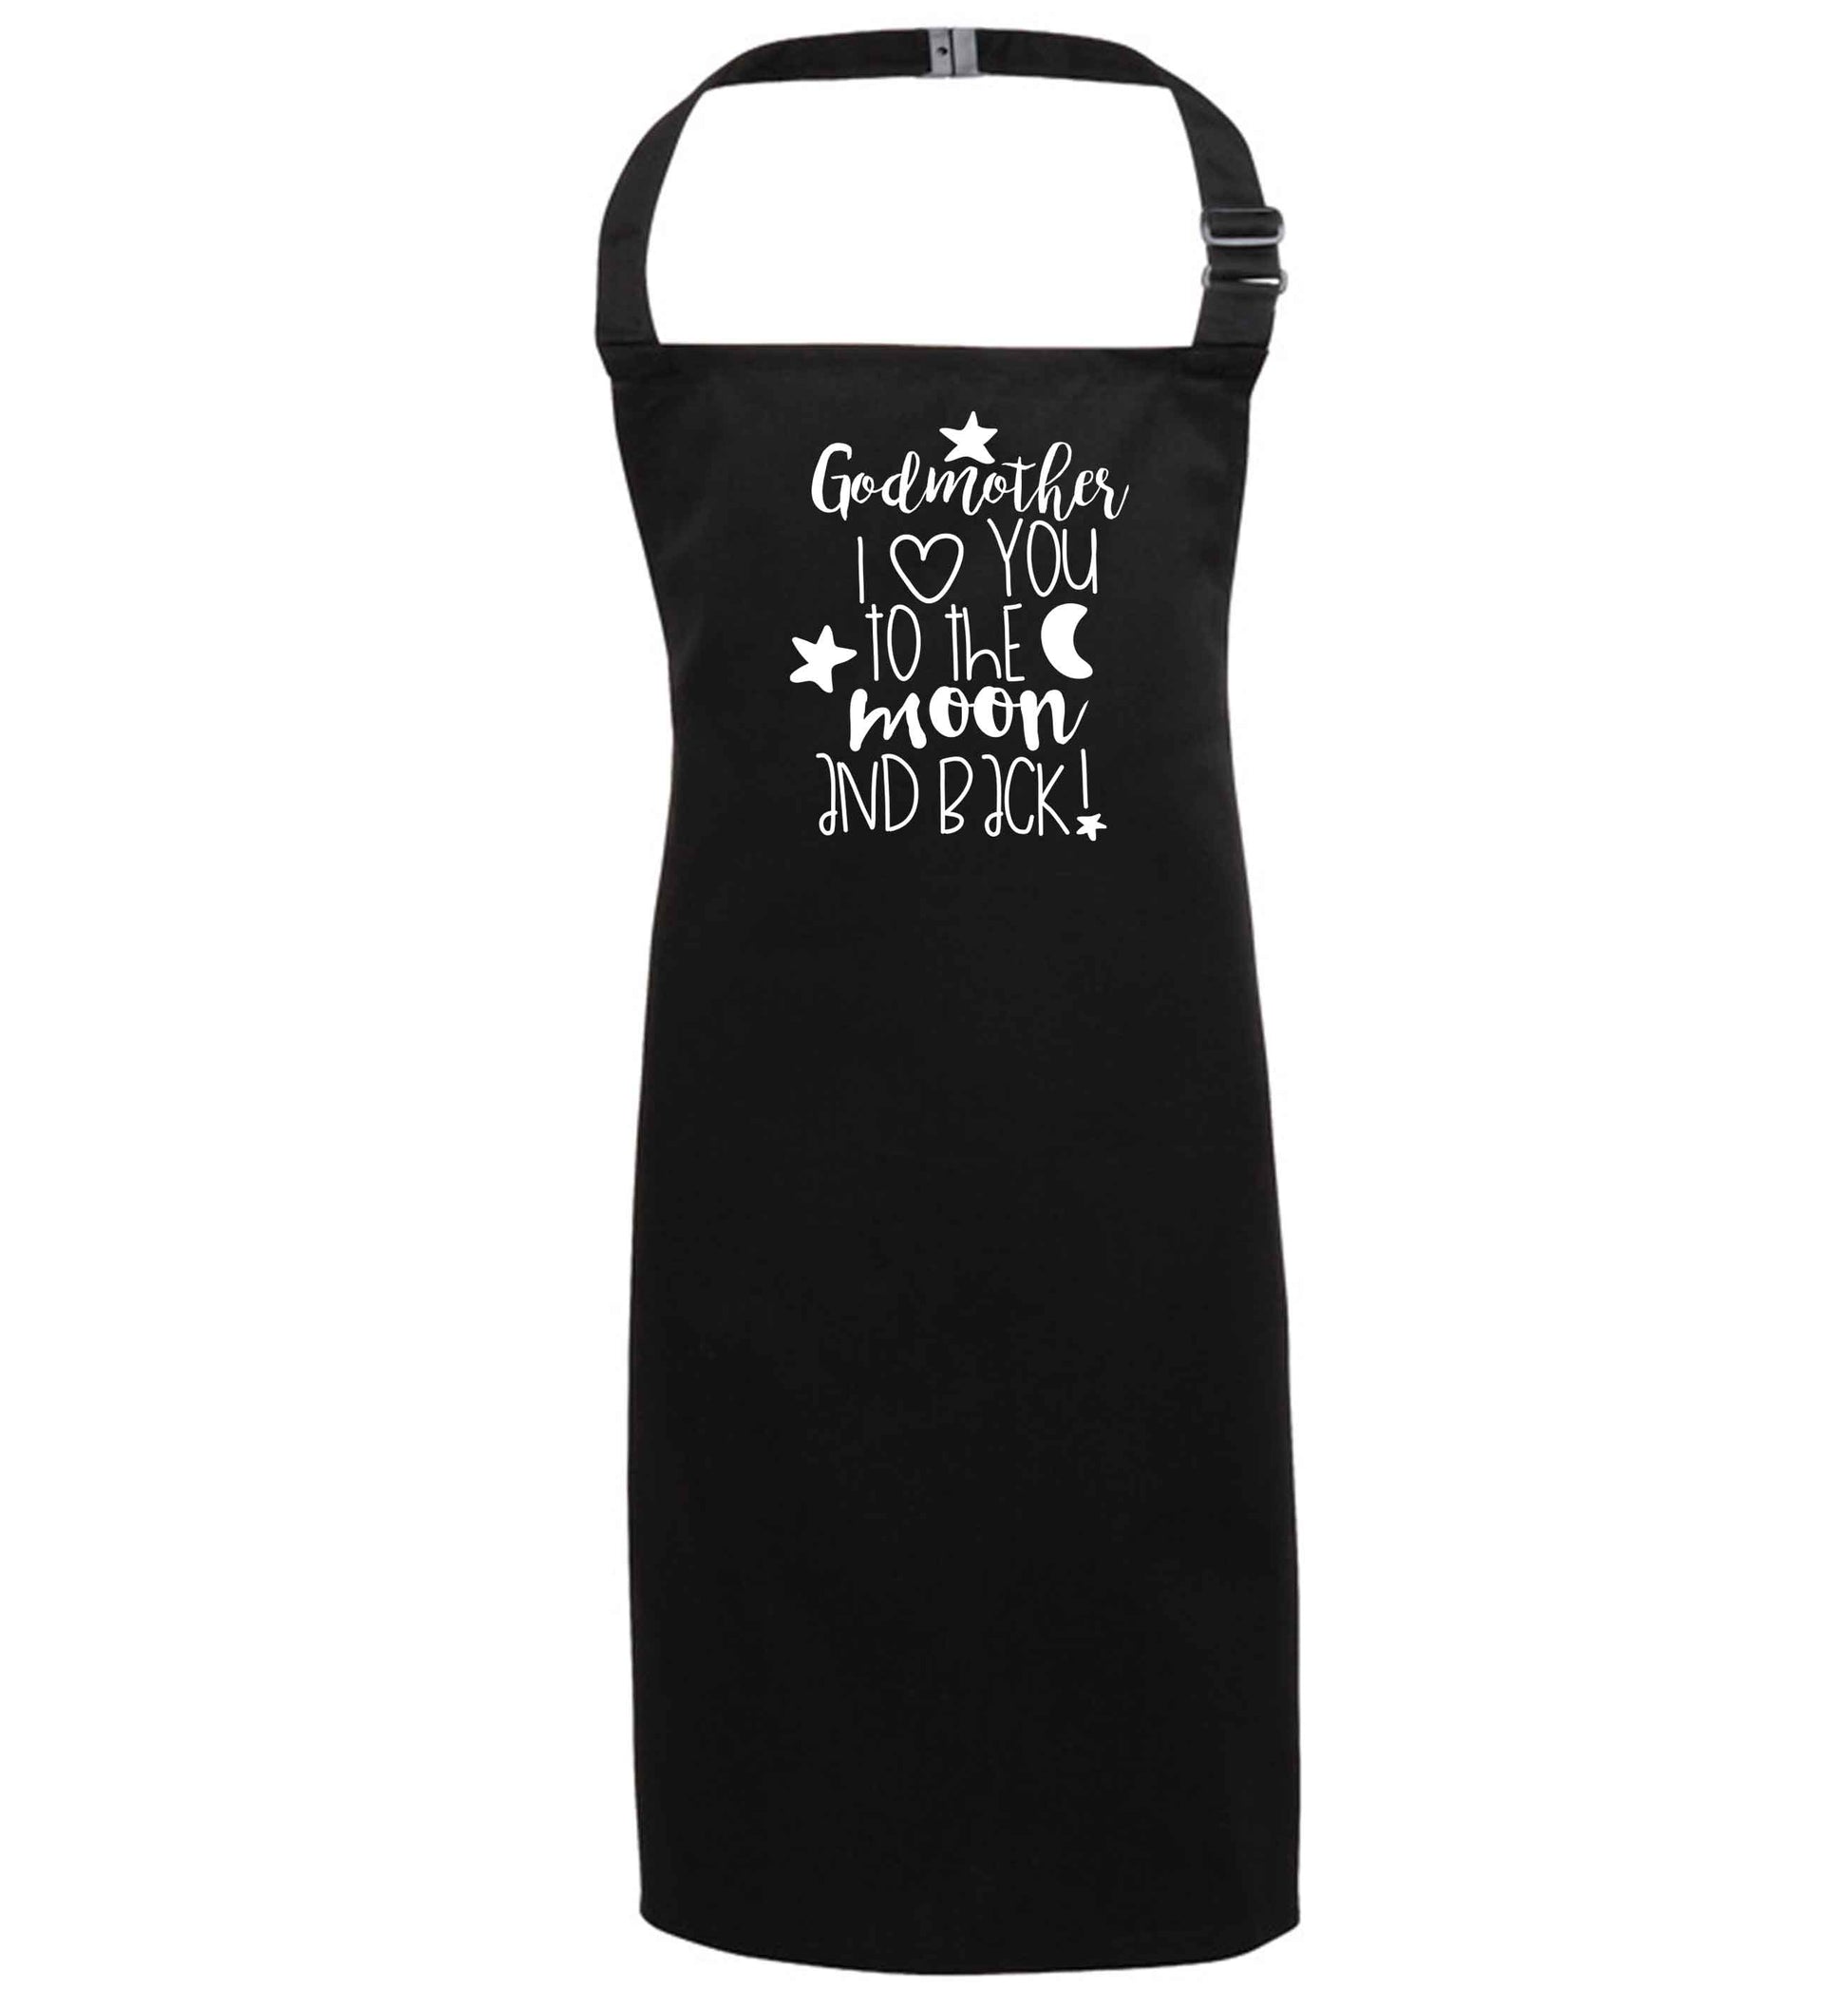 Godmother I love you to the moon and back black apron 7-10 years